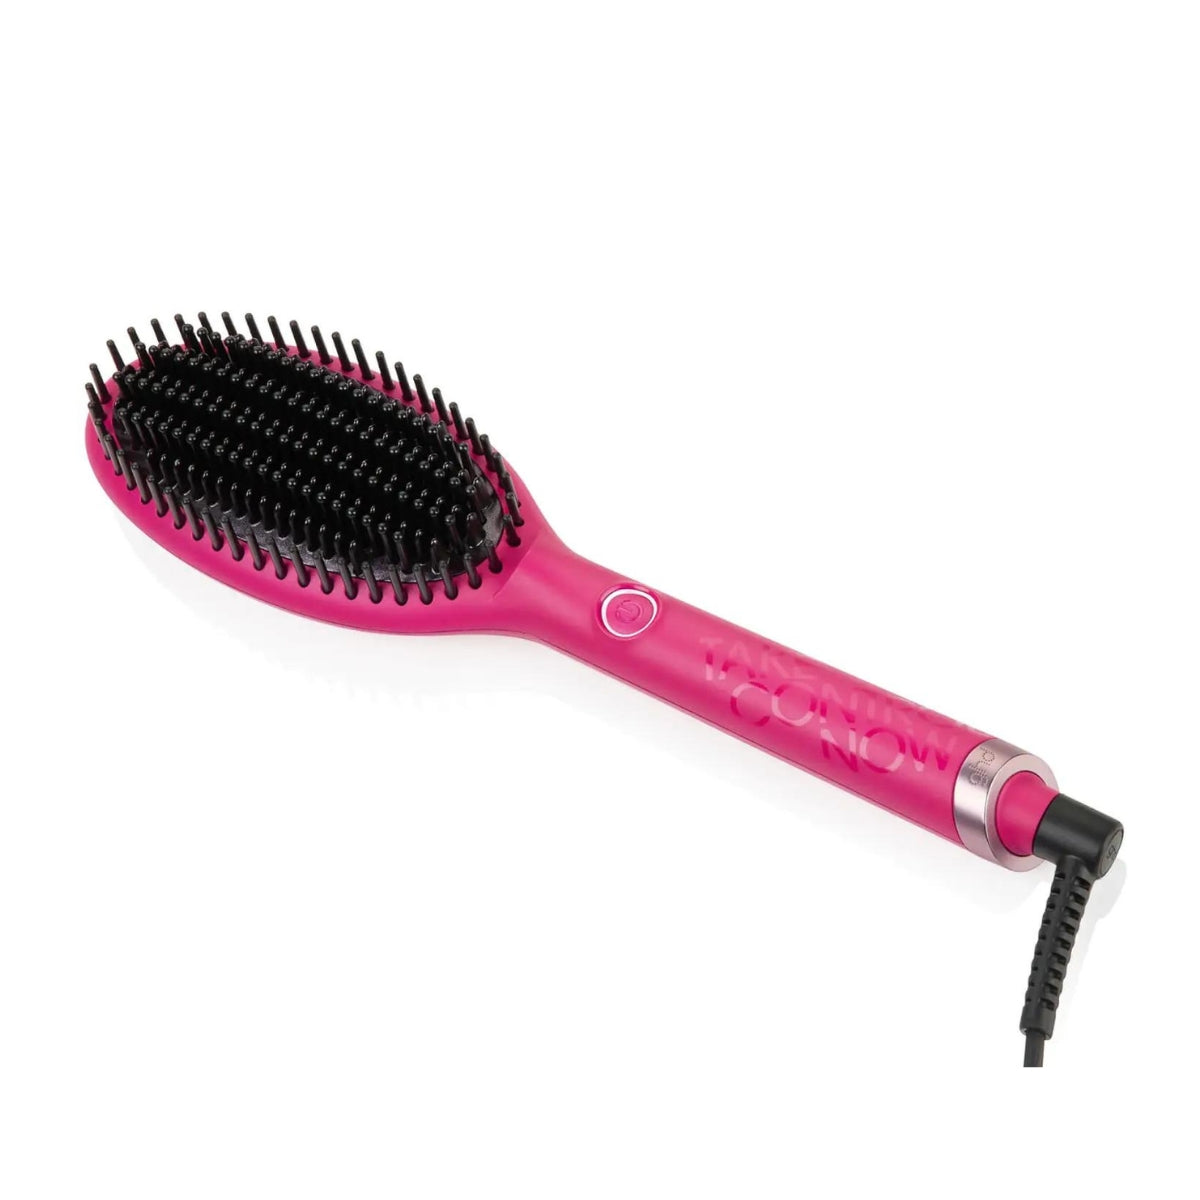 Ghd Glide Limited Edition Smoothing Hot Brush in Orchid Pink